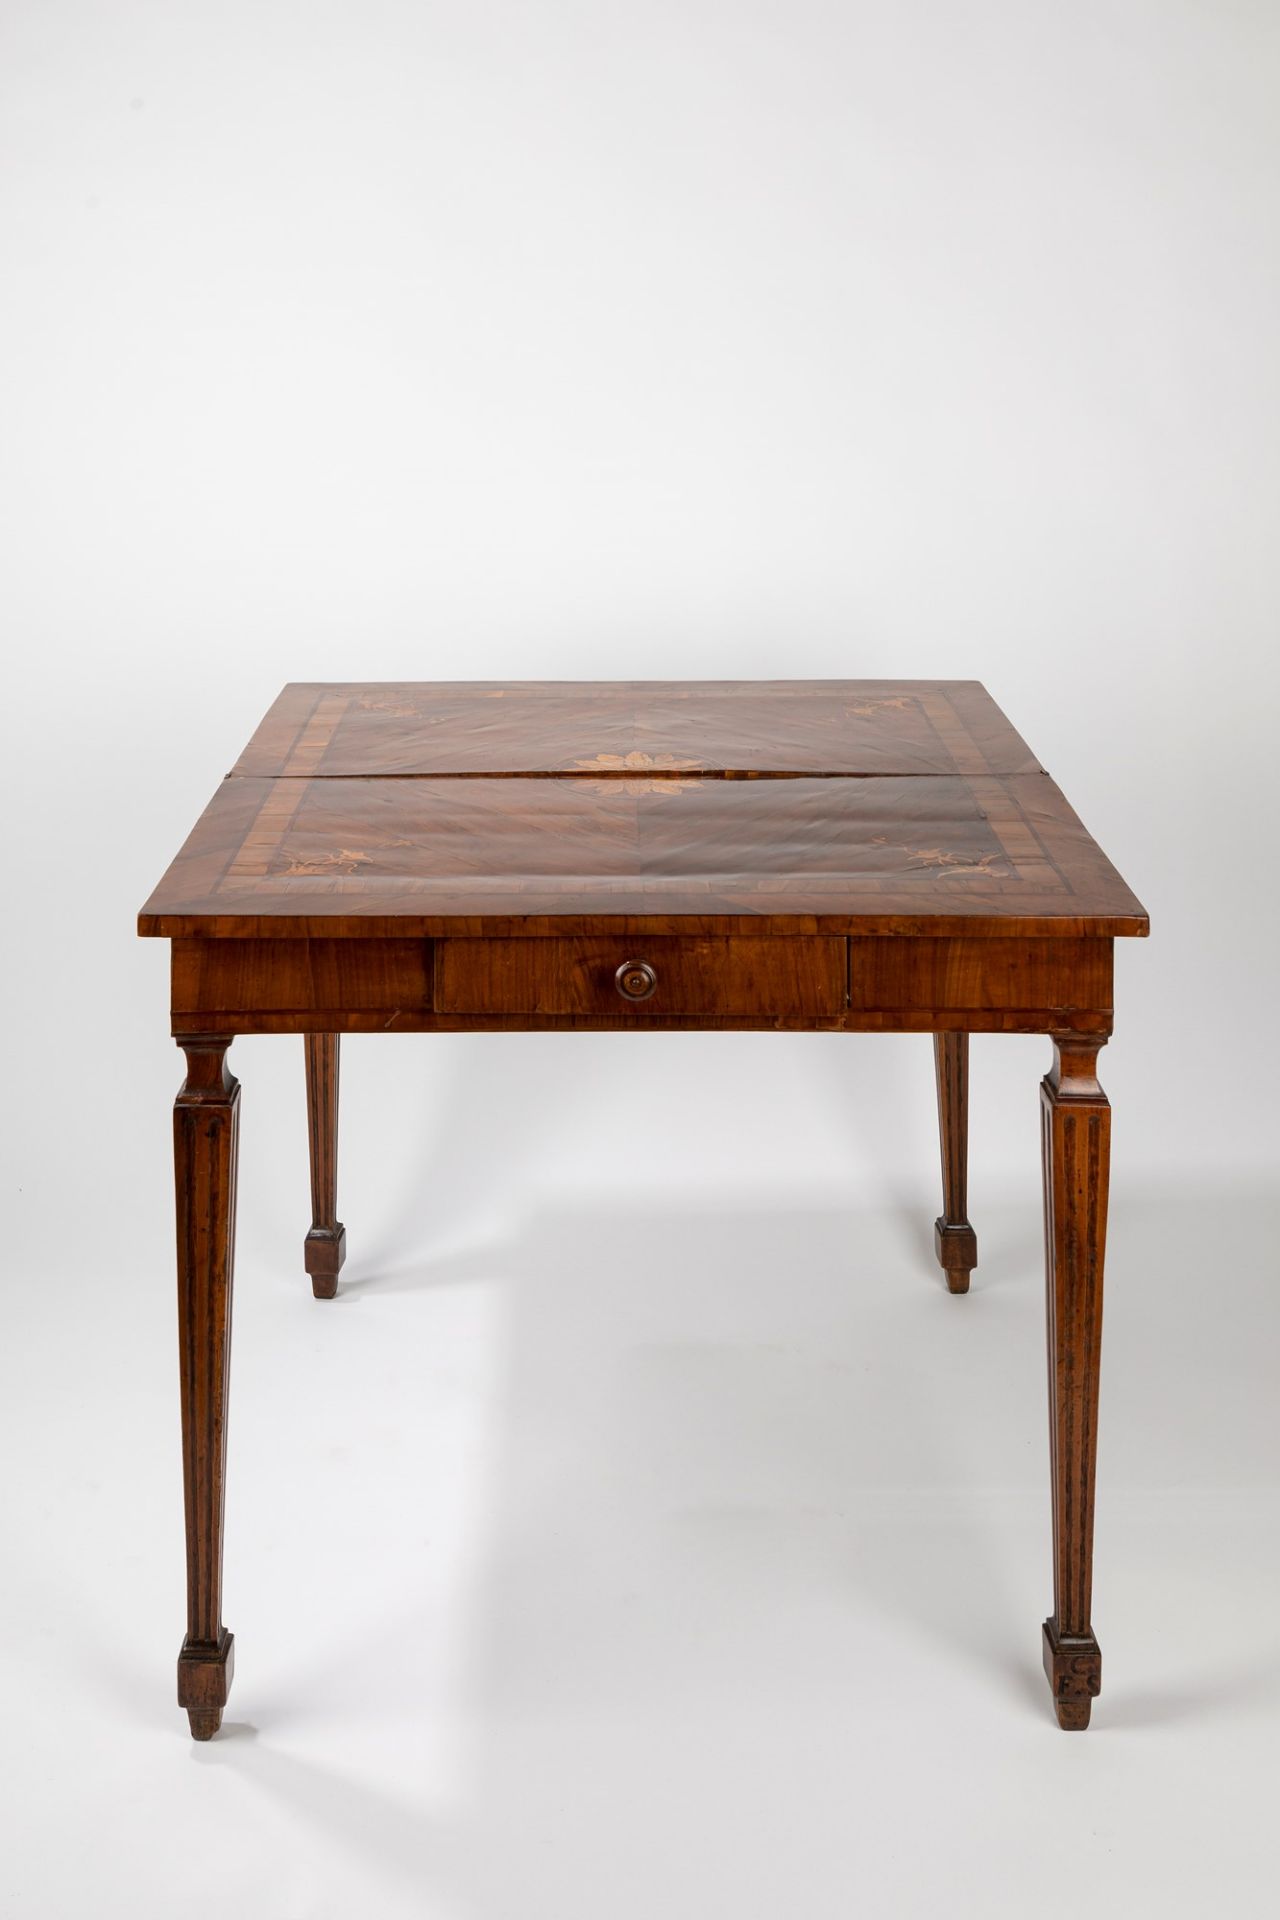 A card table veneered and inlaid in precious woods. Emilia, late eighteenth century